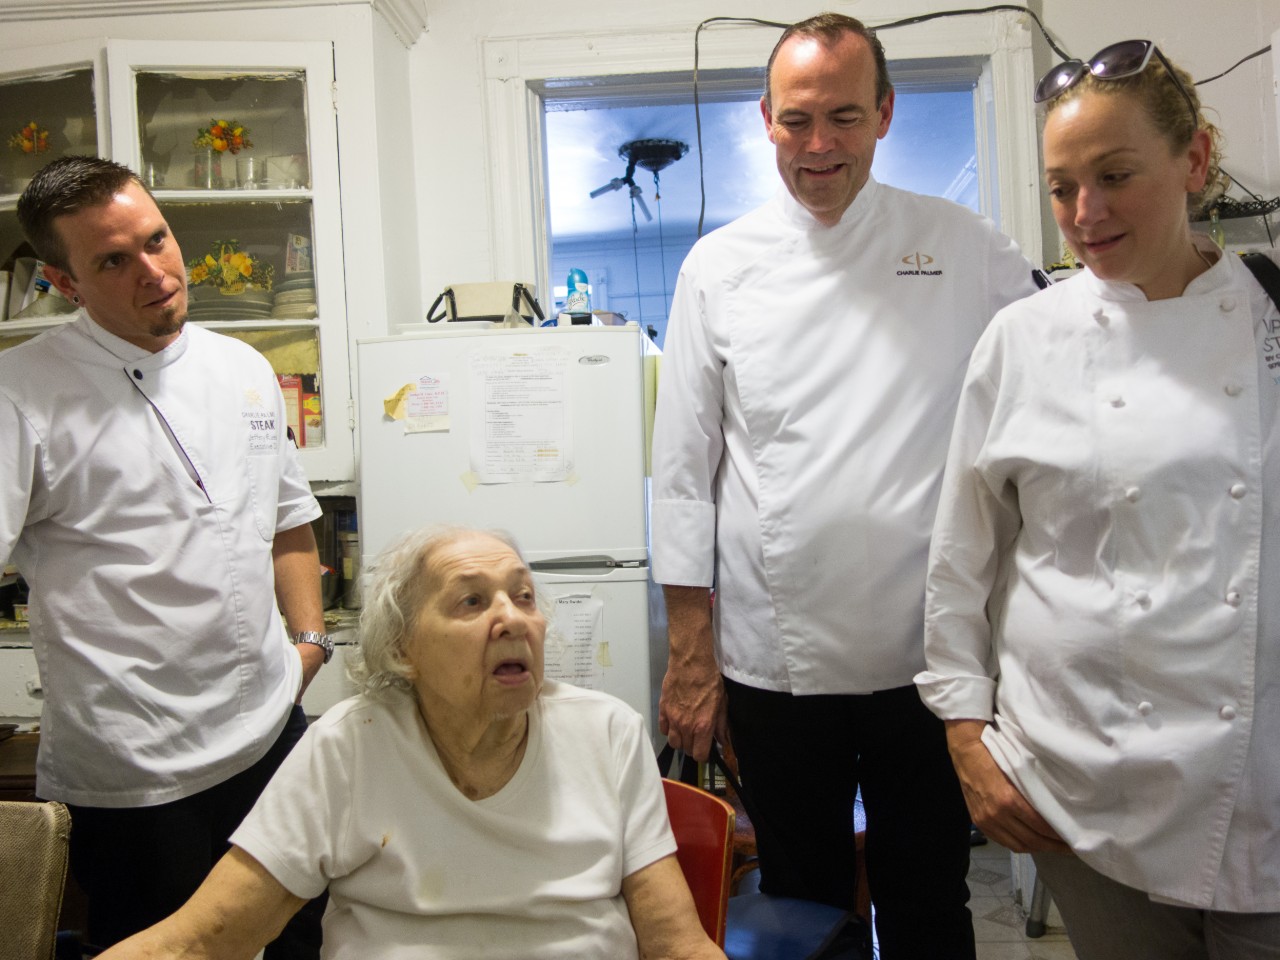 Visiting with Mary, a 92-year old, lifelong New Yorker (photo by TK; courtesy Citymeals on Wheels)